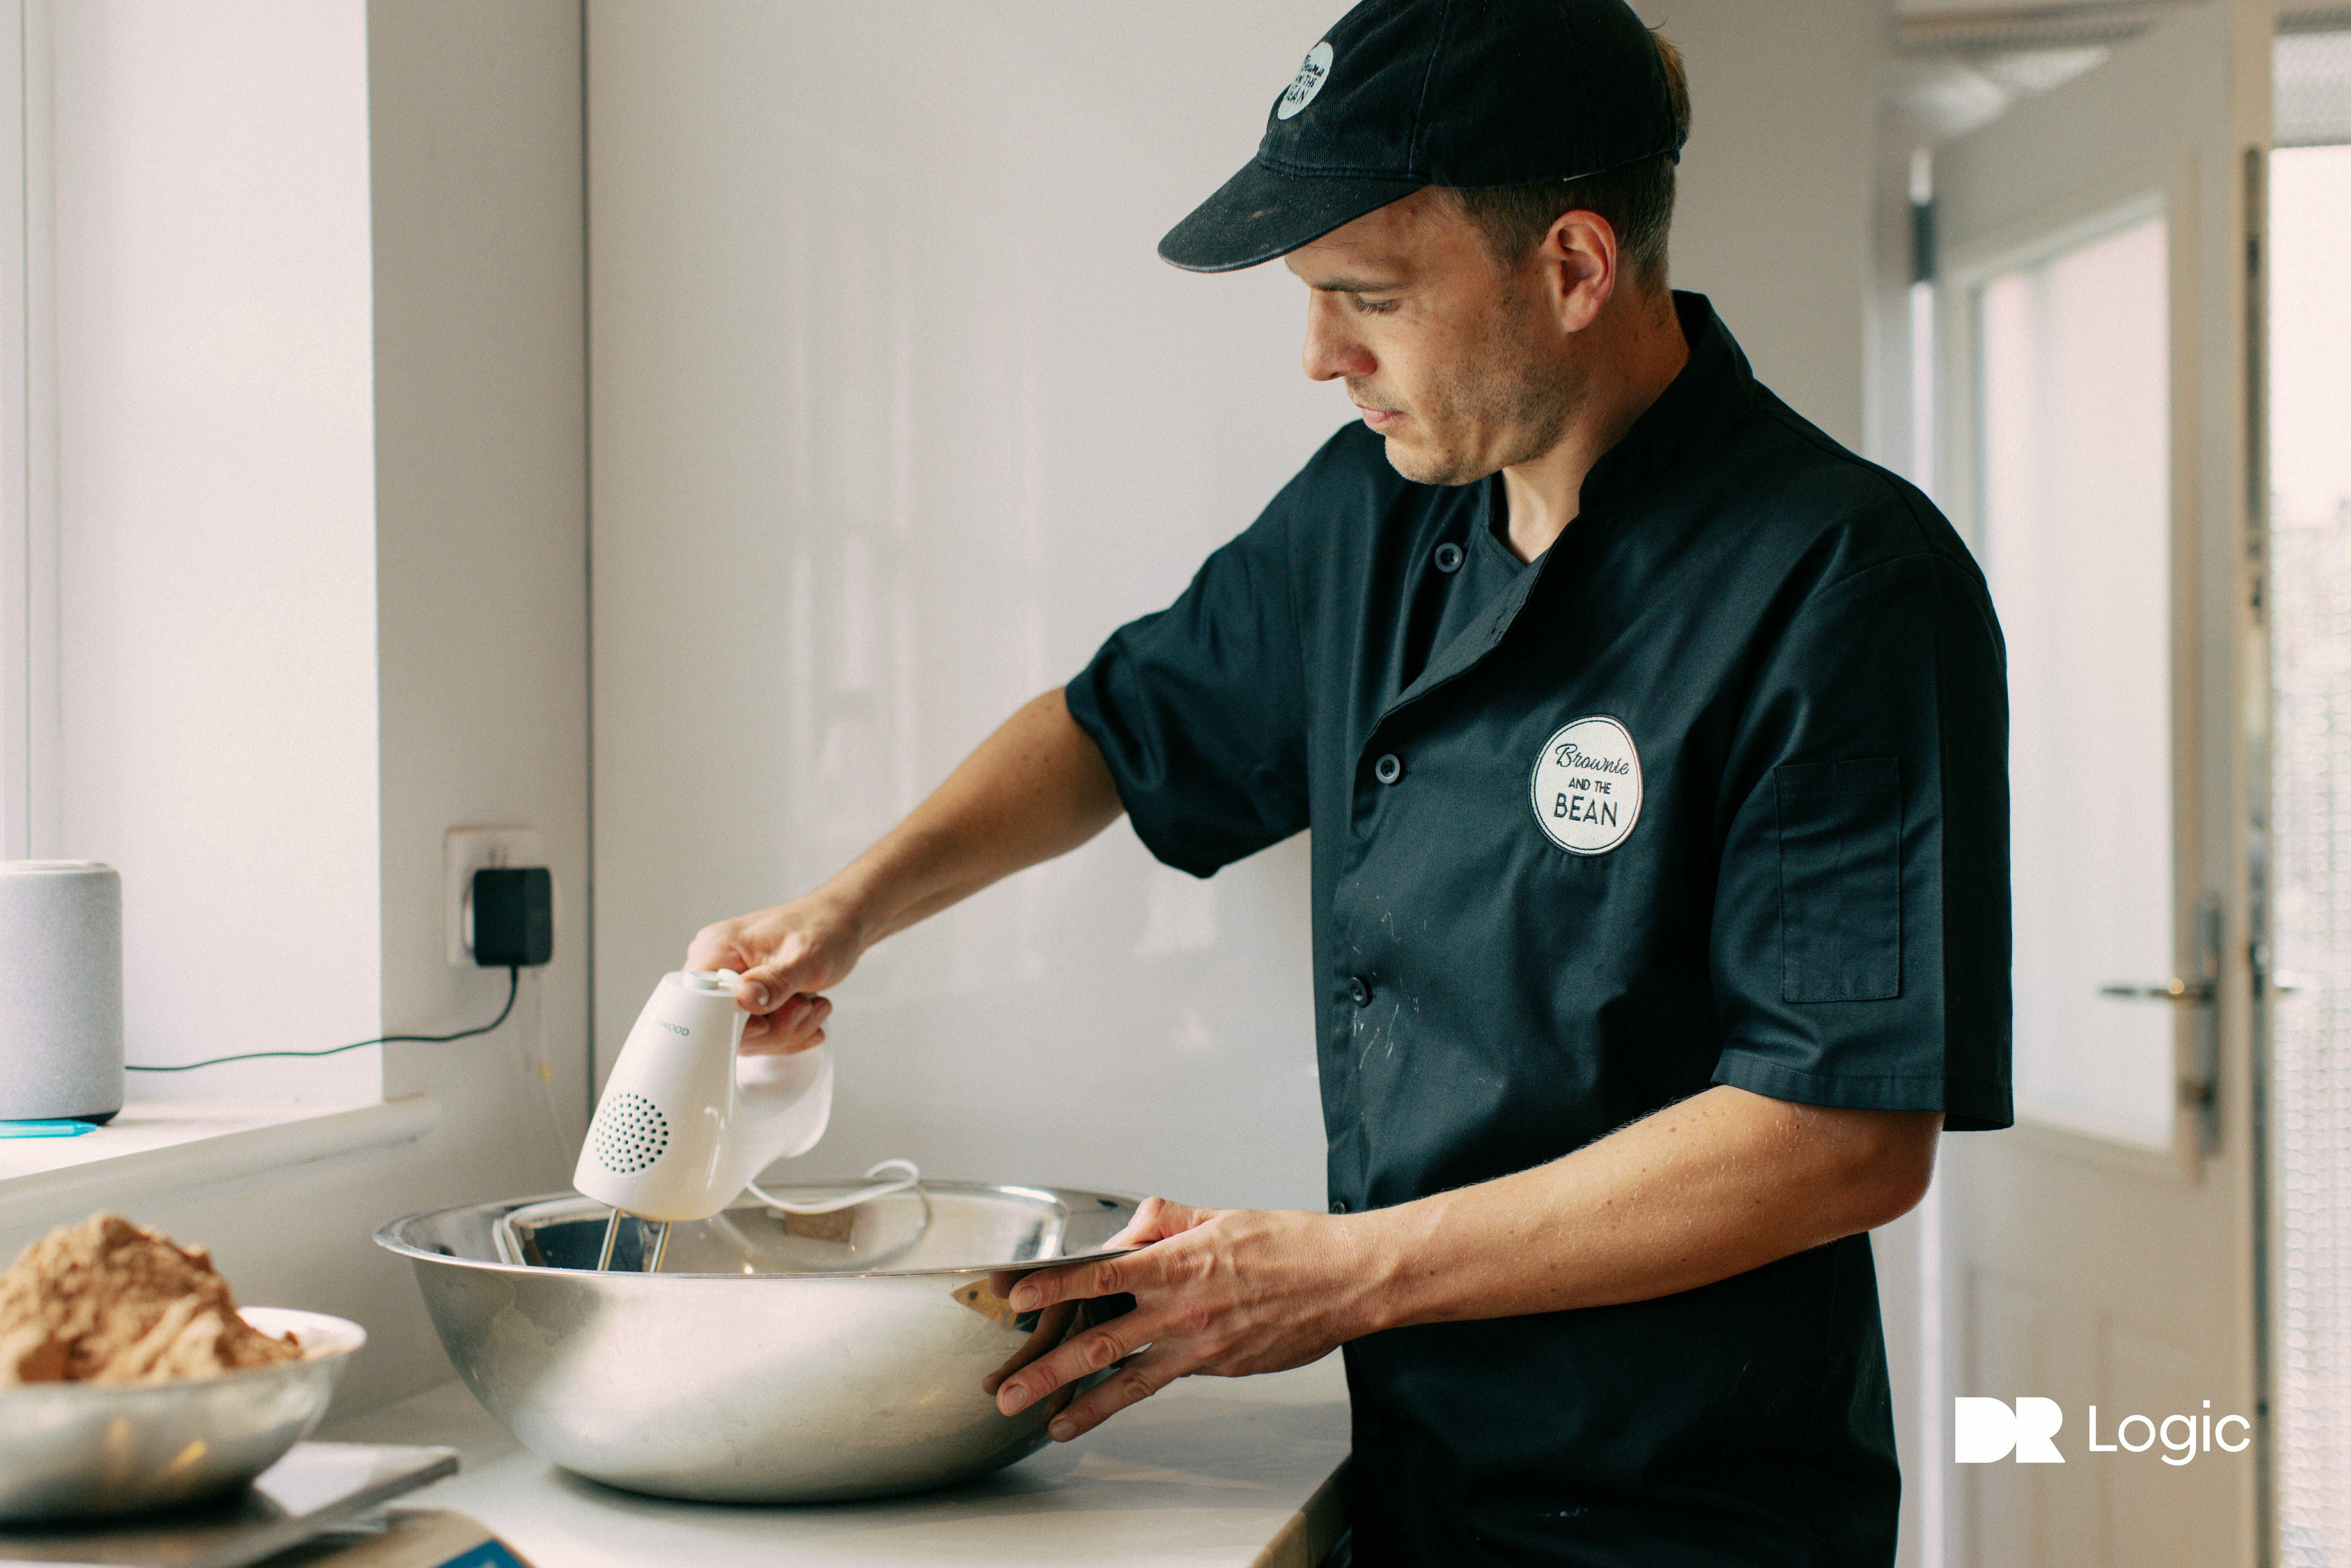 A close up of Bean Daddy in the Brownie and the Bean kitchen. He has a large silver mixing bowl and is using a handheld whisk. He is wearing black chef's whites with the Brownie and the Bean logo and he also has a black cap with the Brownie and the Bean logo on.